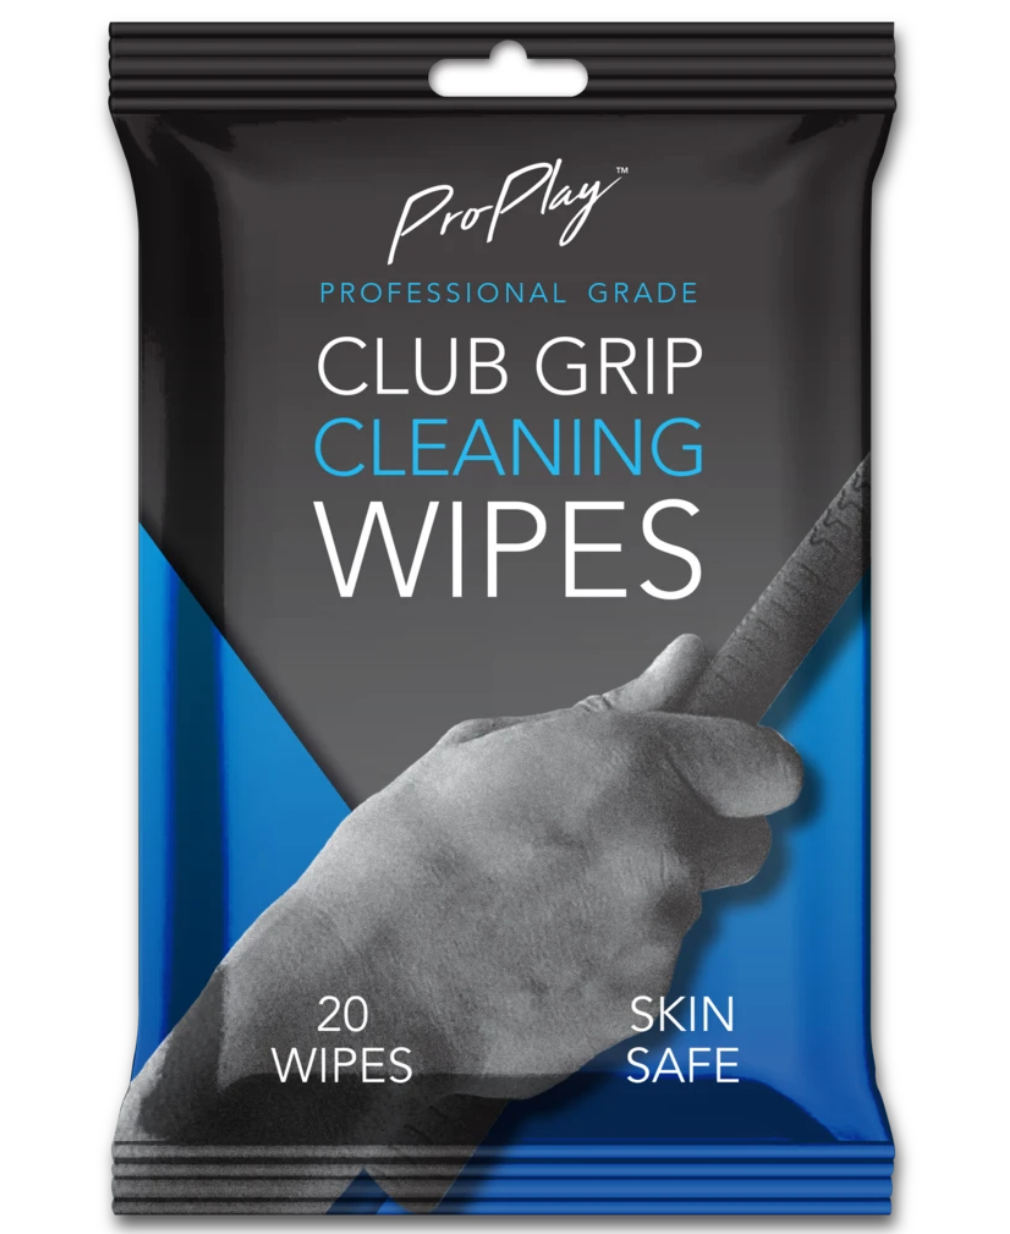 Club Grip Cleaning Wipes